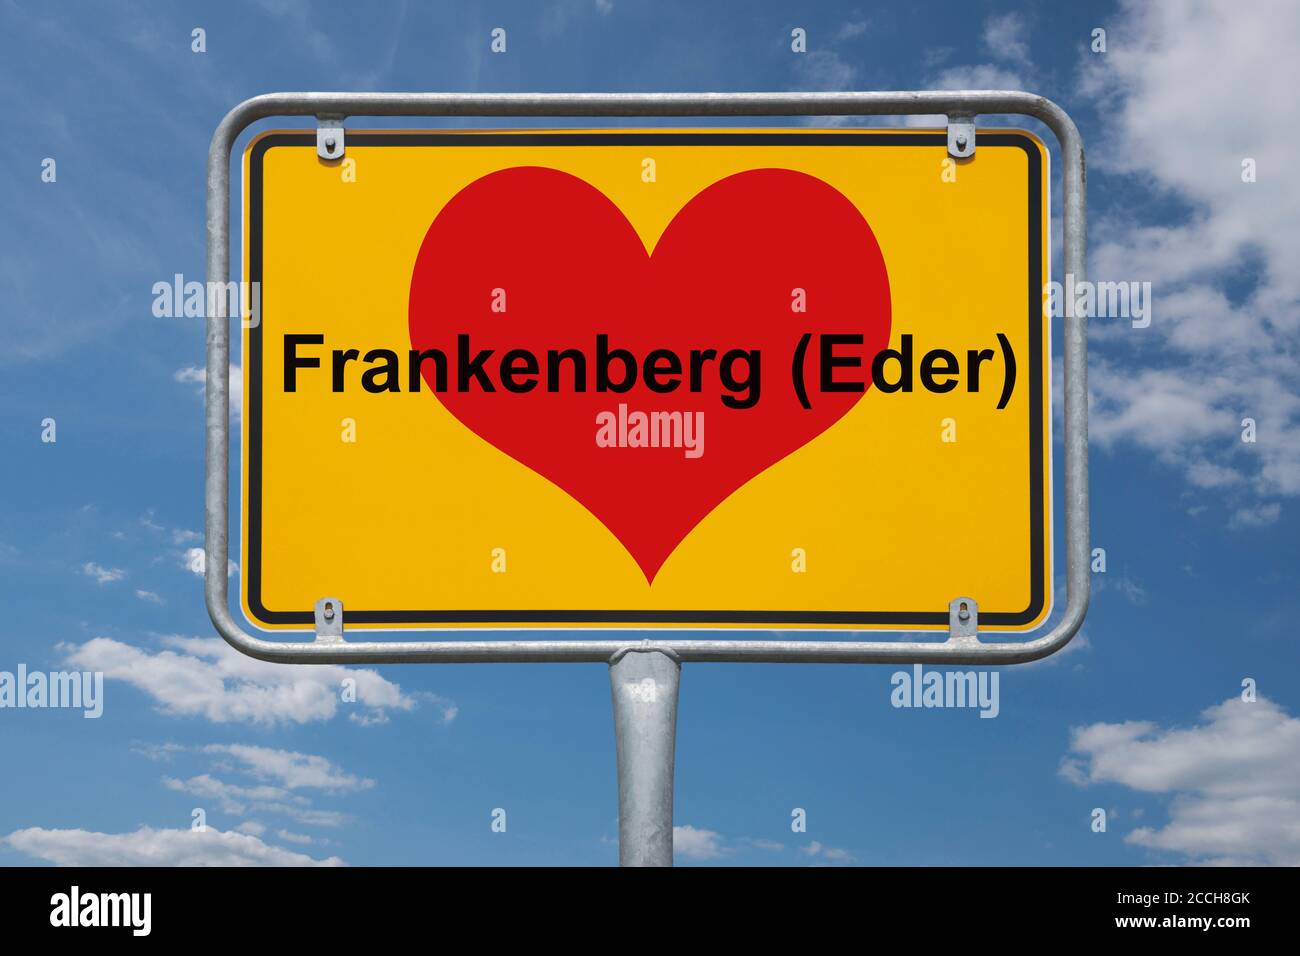 Frankenberg Eder High Resolution Stock Photography and Images - Alamy